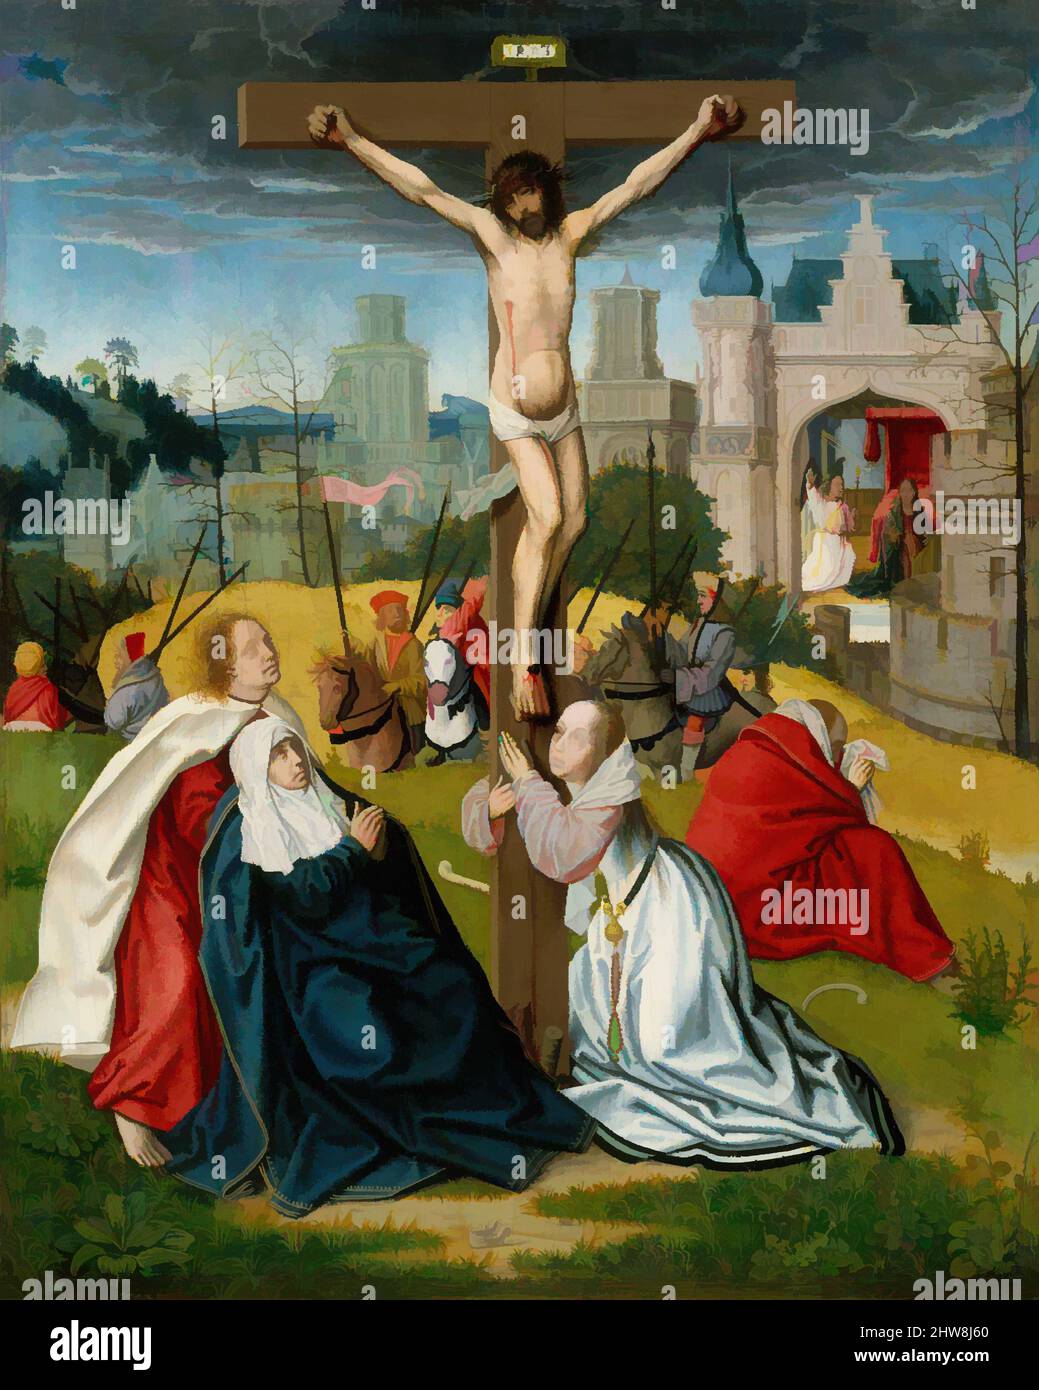 Art inspired by The Crucifixion, ca. 1495, Oil on wood, Overall 13 1/8 x 10 3/4 in. (33.3 x 27.3 cm); painted surface 12 5/8 x 10 1/4 in. (32.1 x 26 cm), Paintings, Attributed to Jan Provost (Netherlandish, Mons (Bergen) ca. 1465–1529 Bruges), This exquisite private devotional painting, Classic works modernized by Artotop with a splash of modernity. Shapes, color and value, eye-catching visual impact on art. Emotions through freedom of artworks in a contemporary way. A timeless message pursuing a wildly creative new direction. Artists turning to the digital medium and creating the Artotop NFT Stock Photo